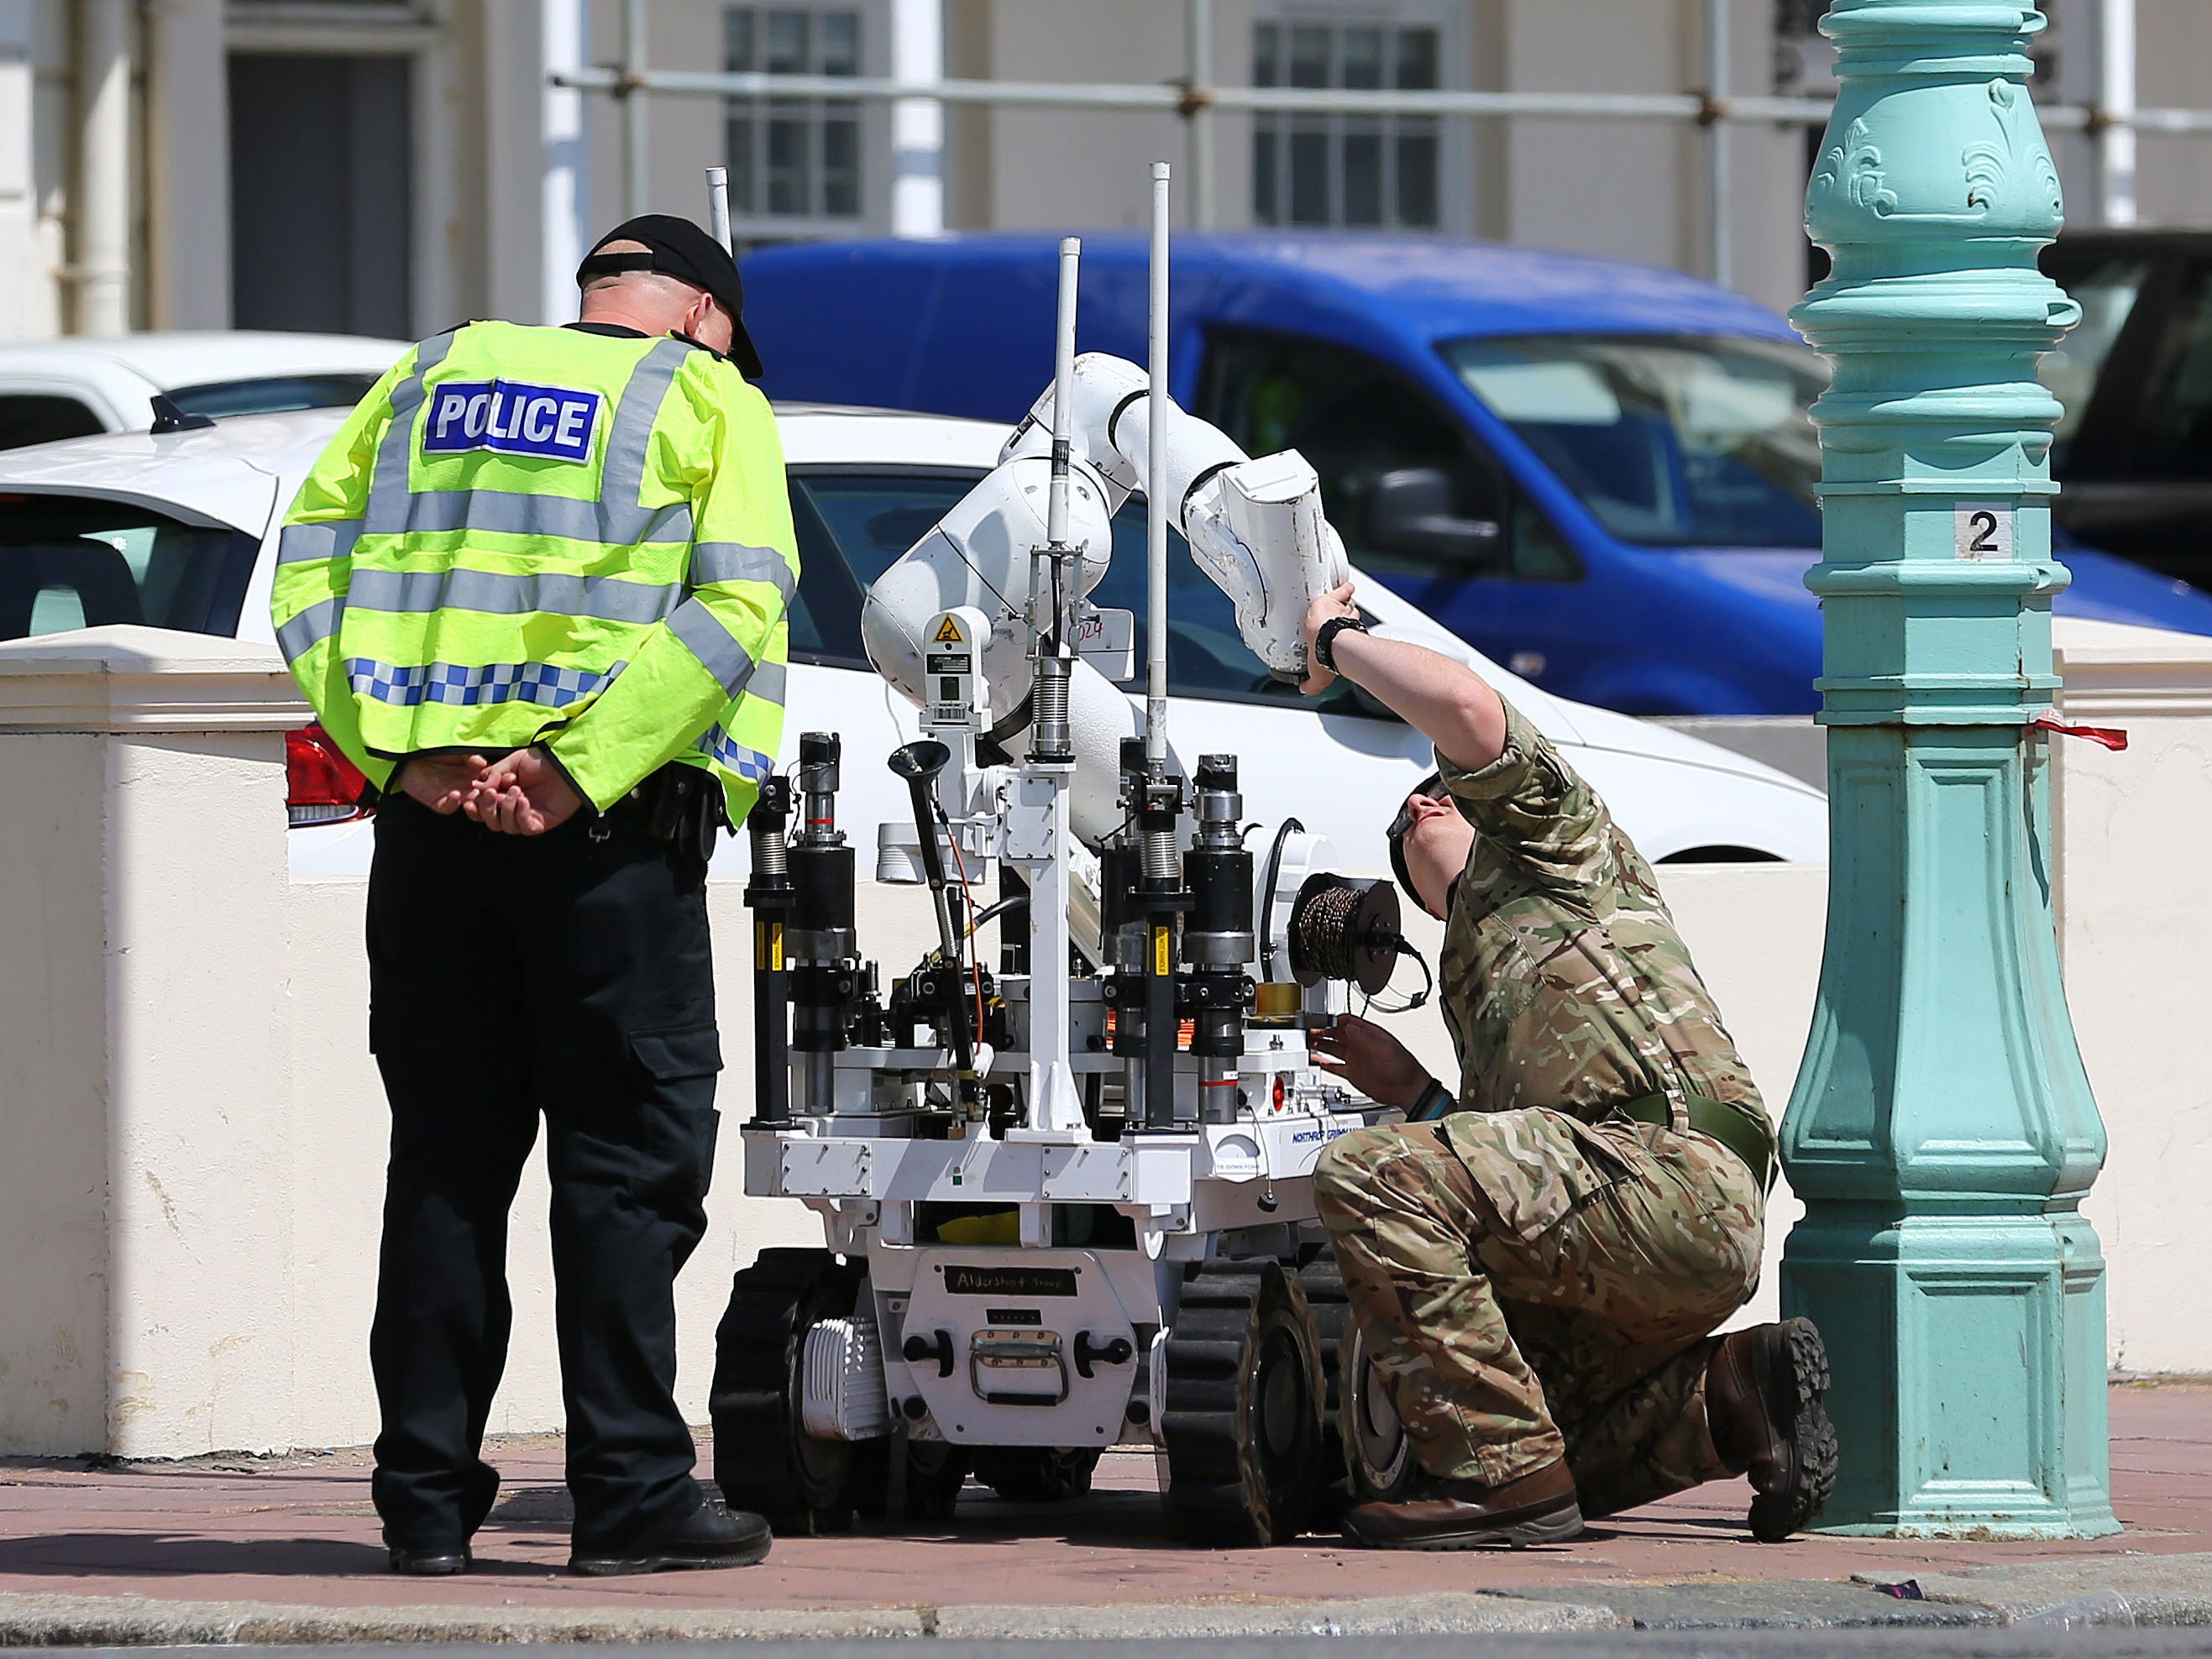 Bomb disposal teams were called in